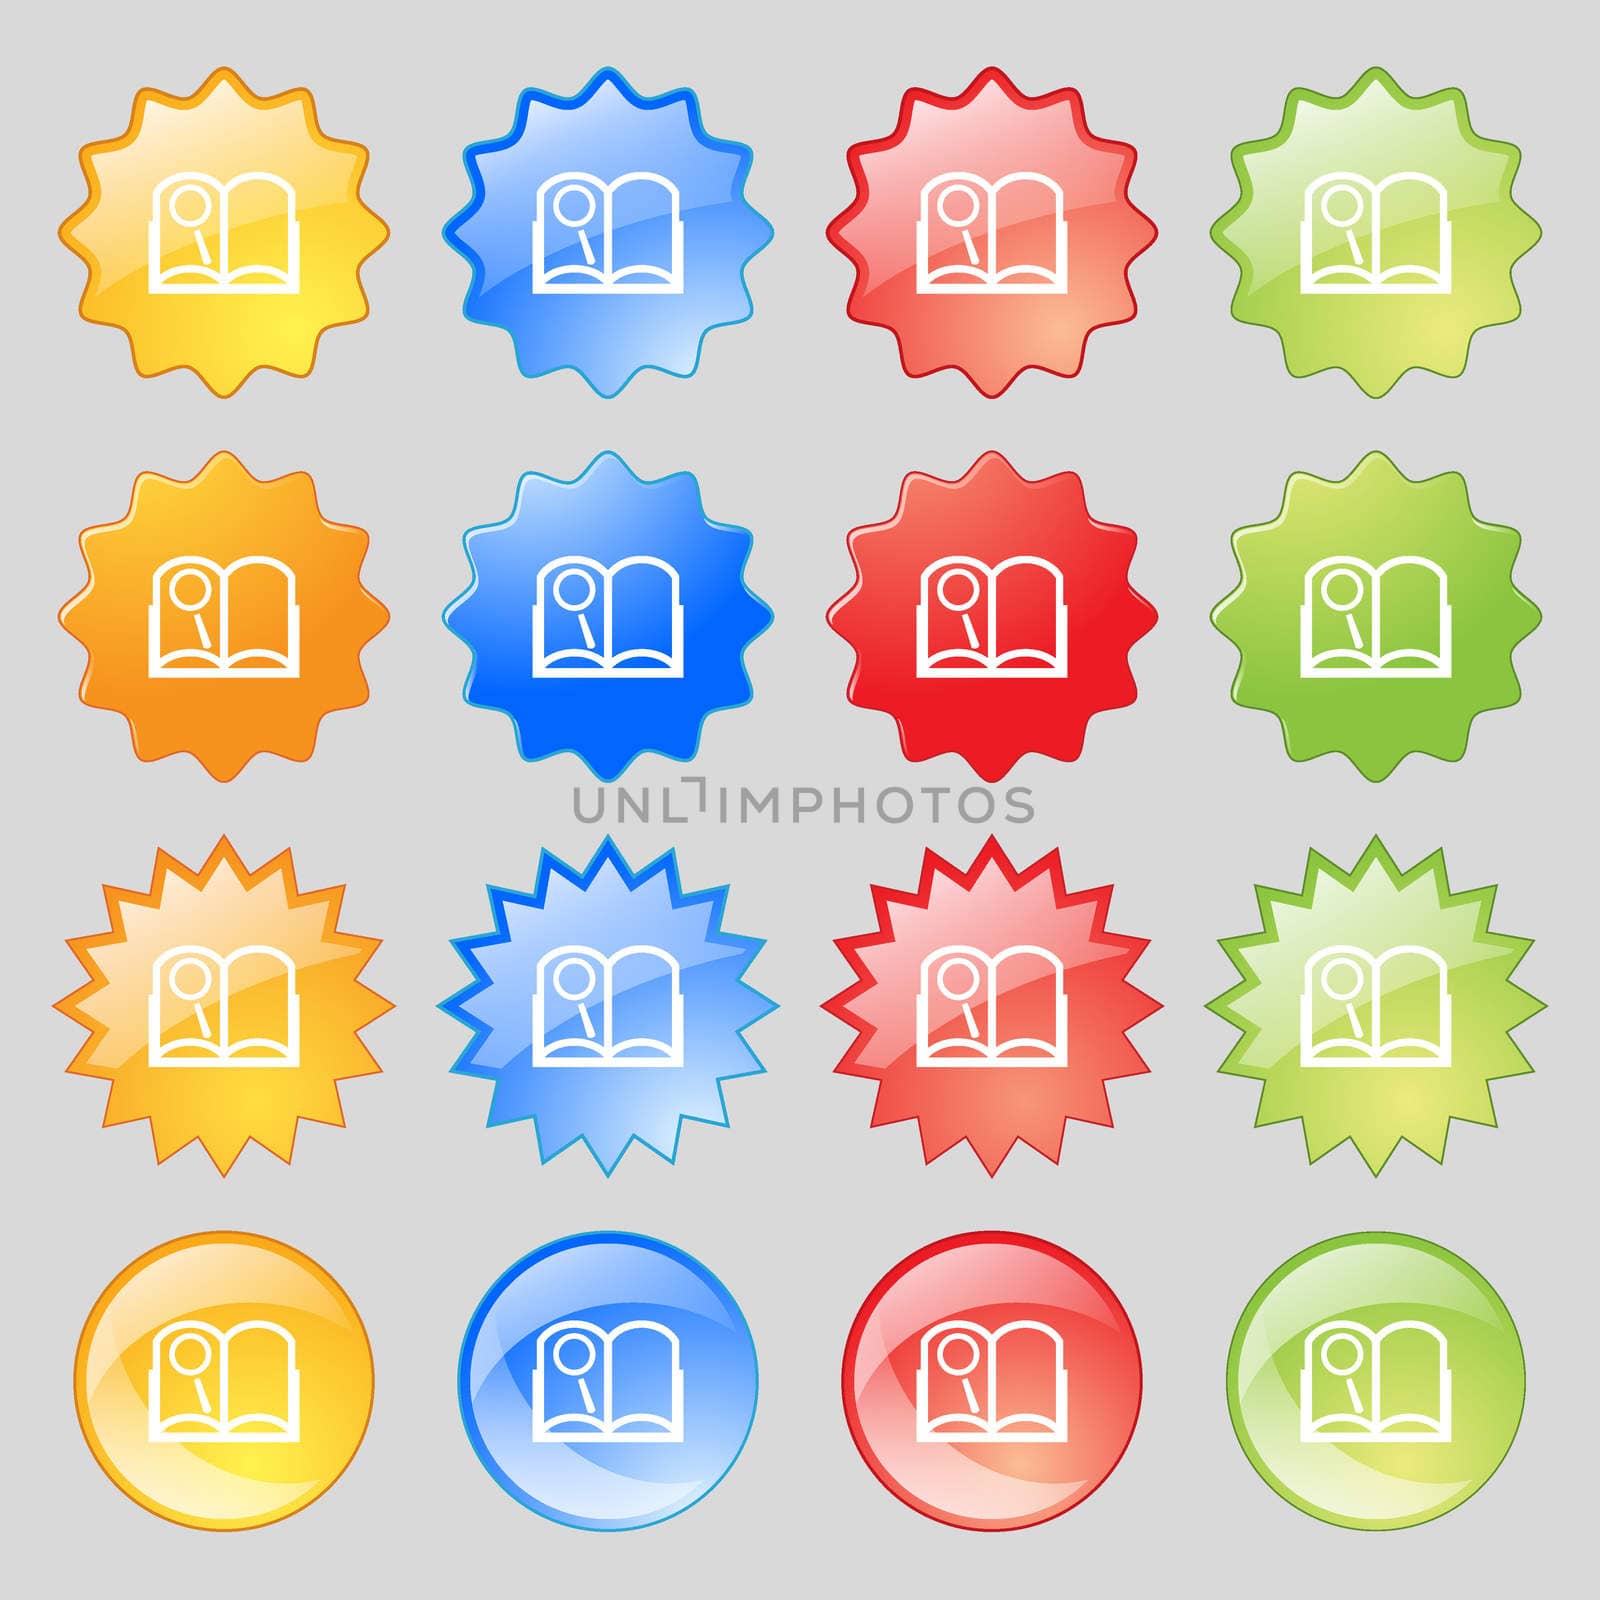 Book sign icon. Open book symbol. Big set of 16 colorful modern buttons for your design. illustration